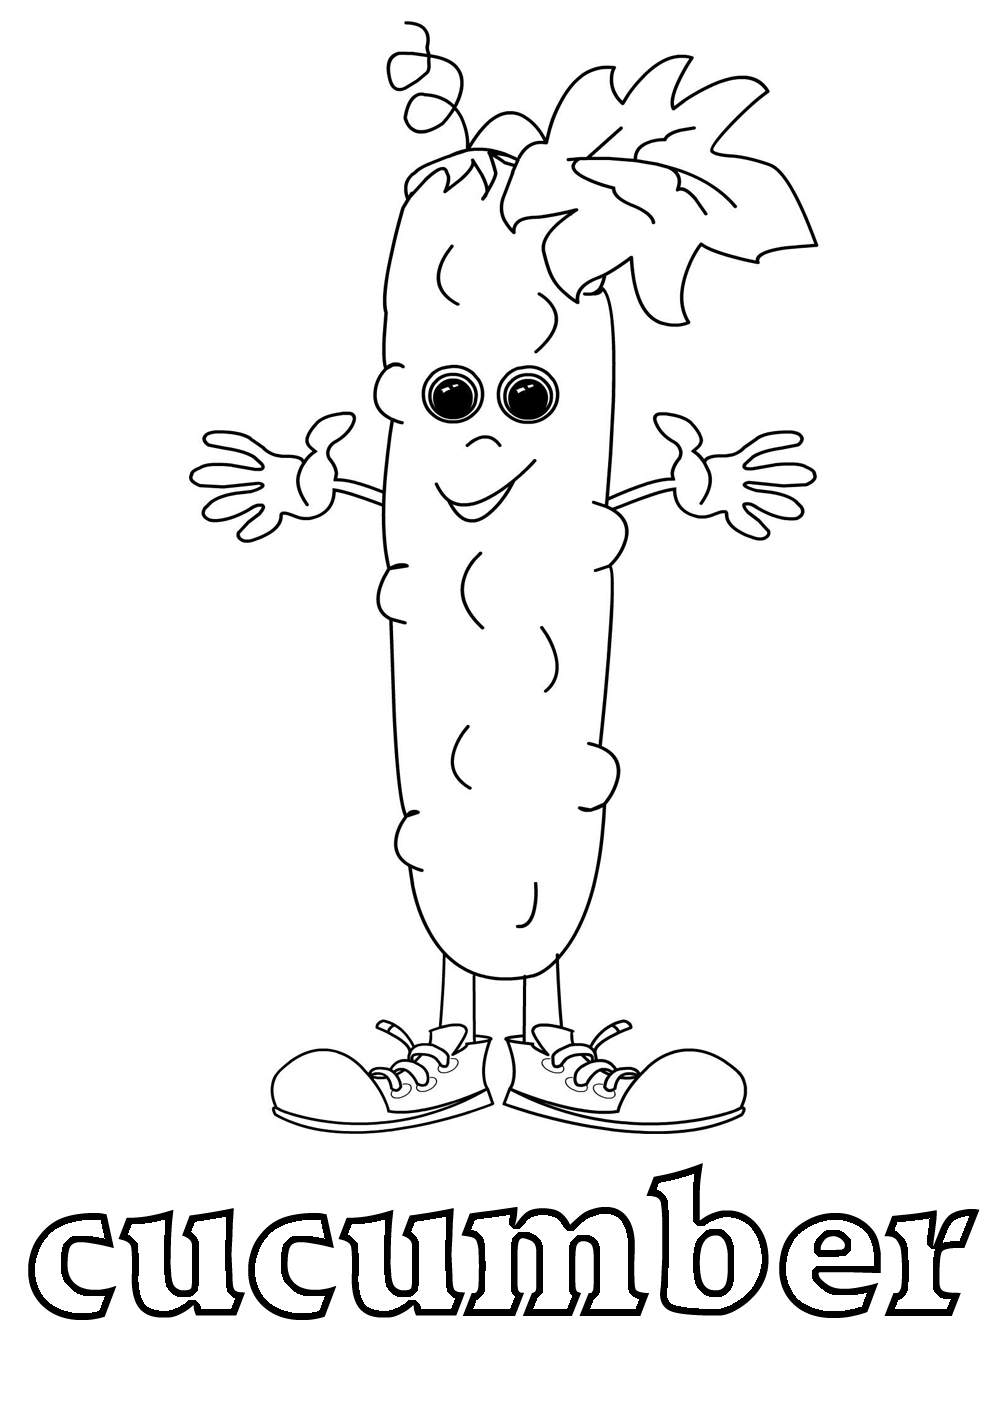 Addition Coloring Page